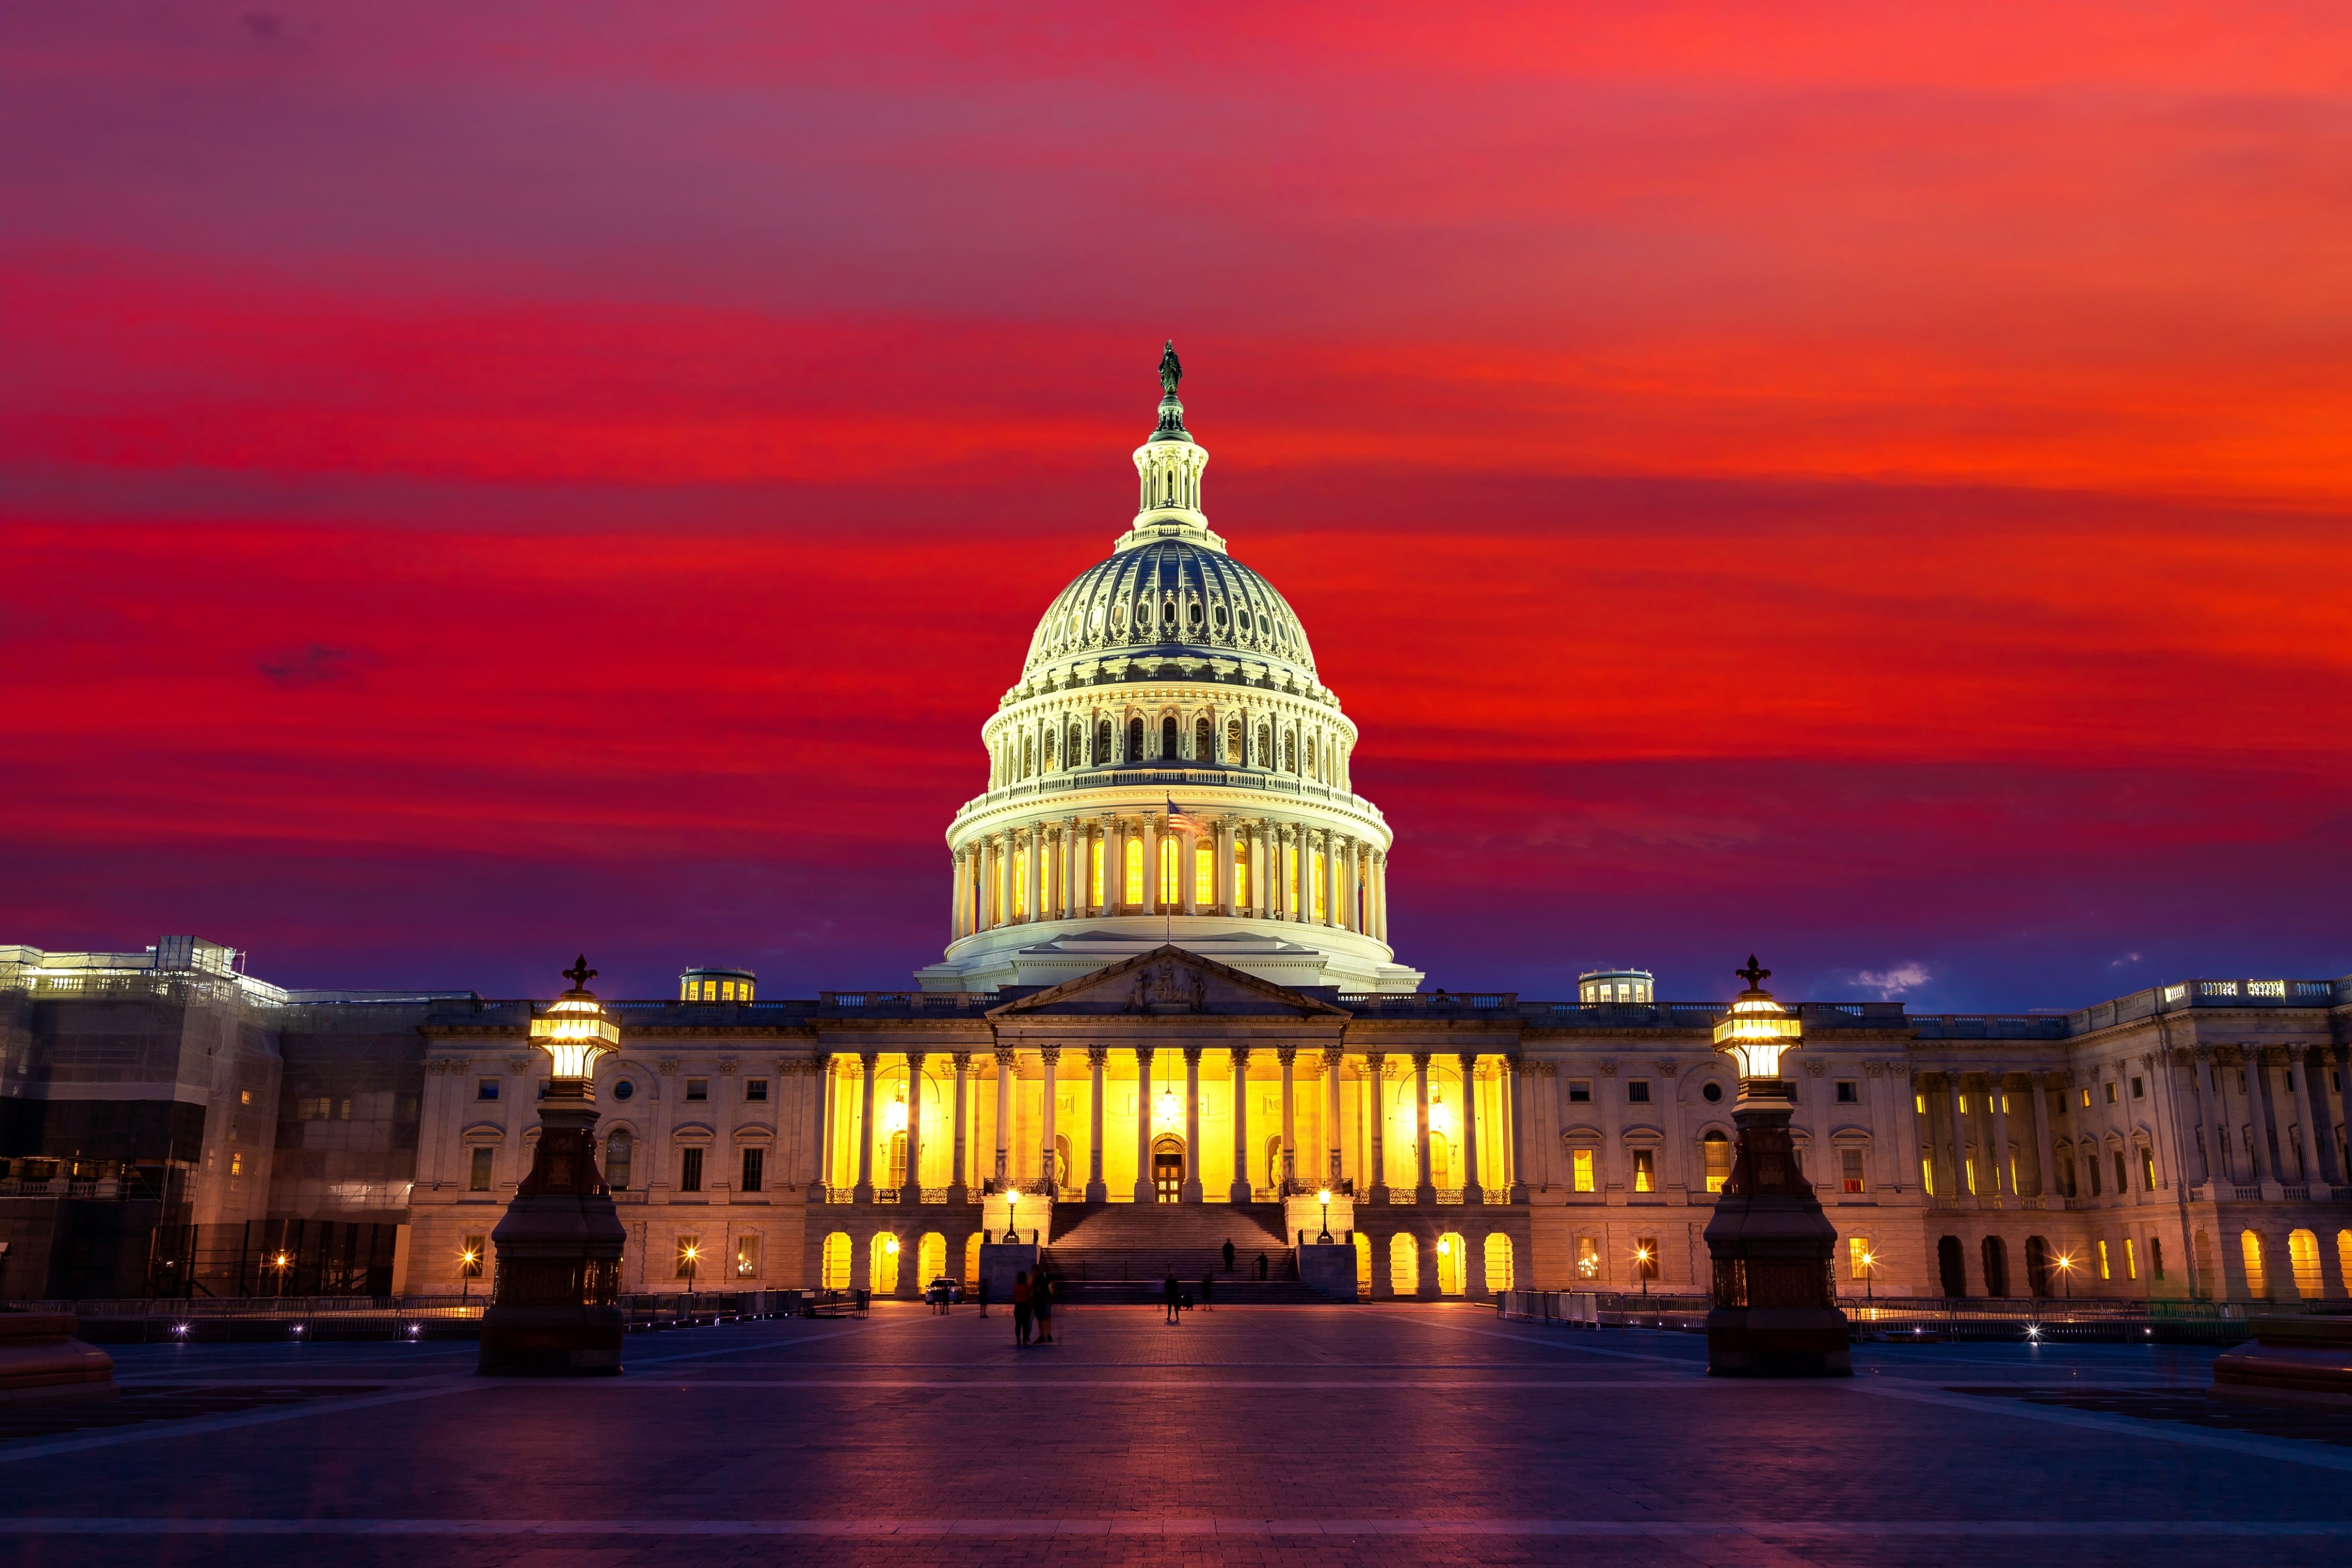 The US Capitol building in Washington. Photo: Shutterstock